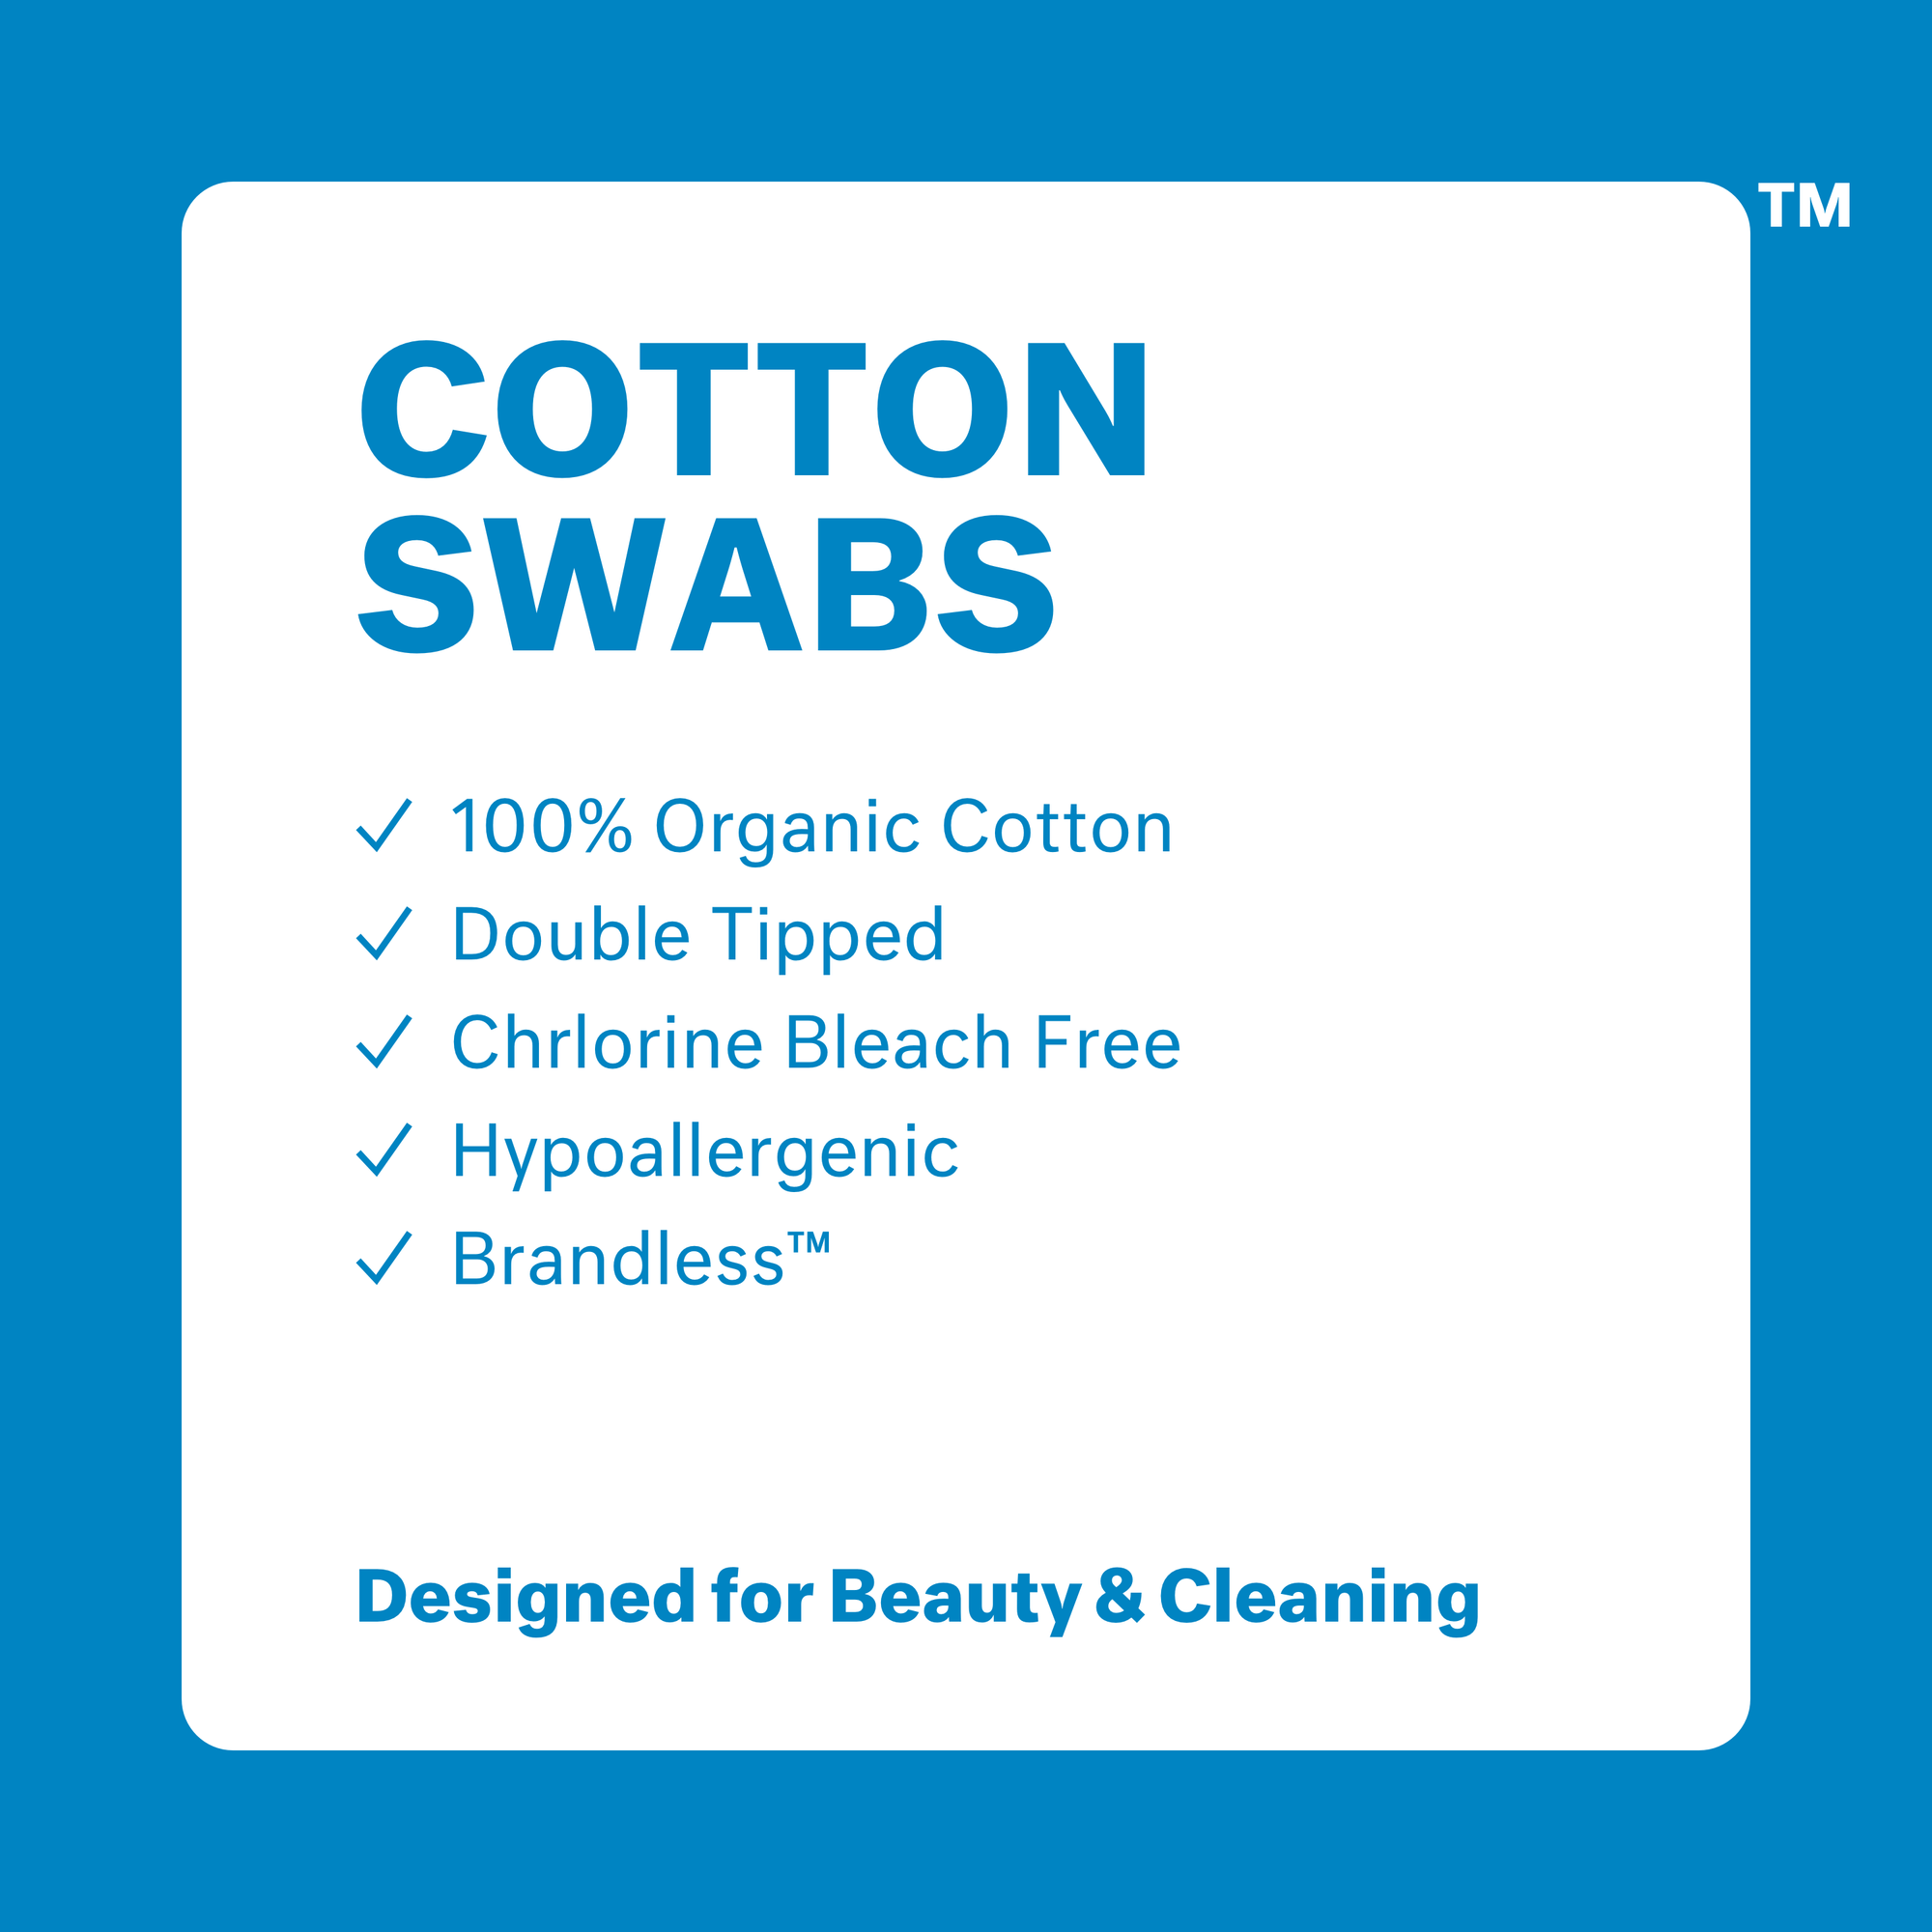 Buy 3 get 1 free! Cotton Swabs. 100% organic cotton. double tipped. chlorine bleach free. hypoallergenic. Brandless. Each of the four boxes contains 200 Cotton Swabs.